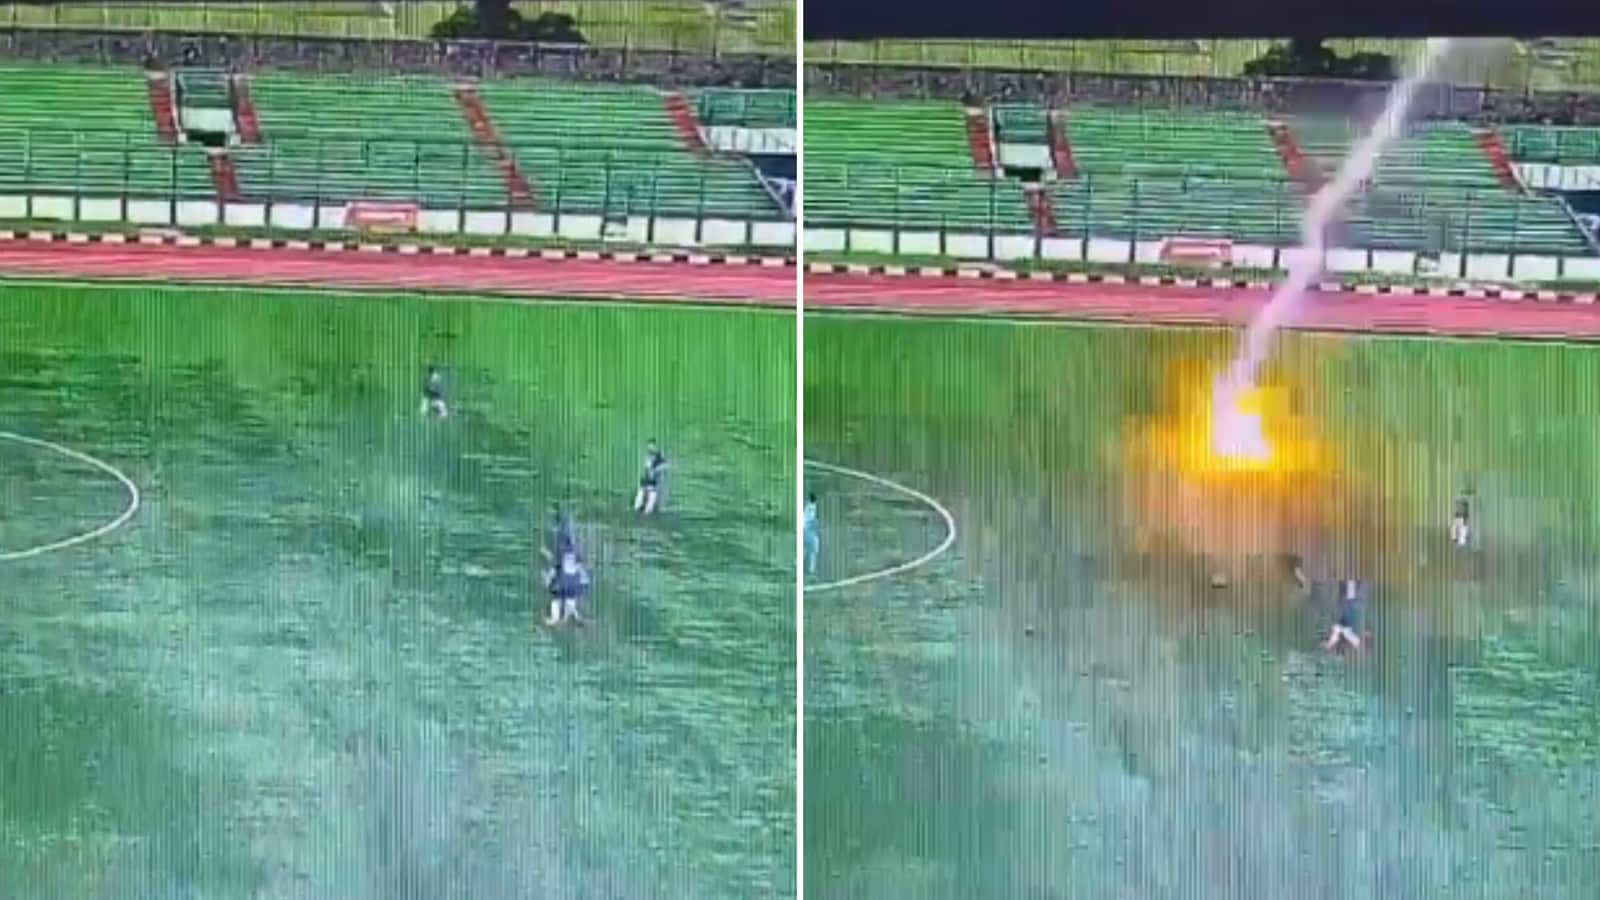 Footballer dies after being hit by lightning in Indonesia. Harrowing incident captured on camera